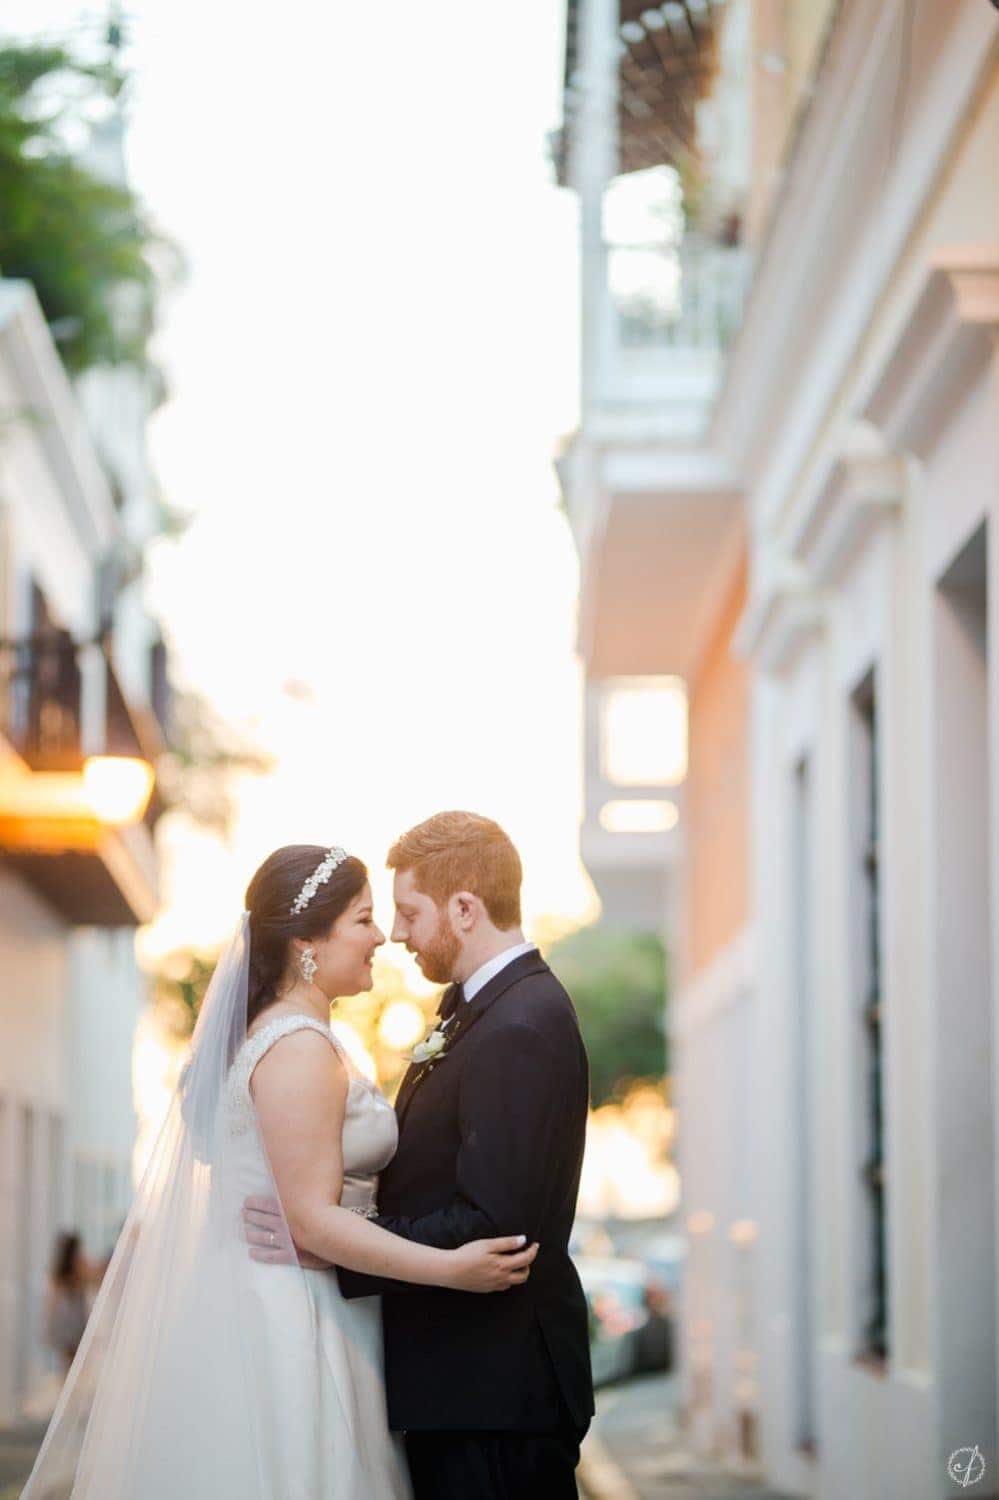 luxury wedding photography at El Convento Hotel by San Juan based photographer Camille Fontanez